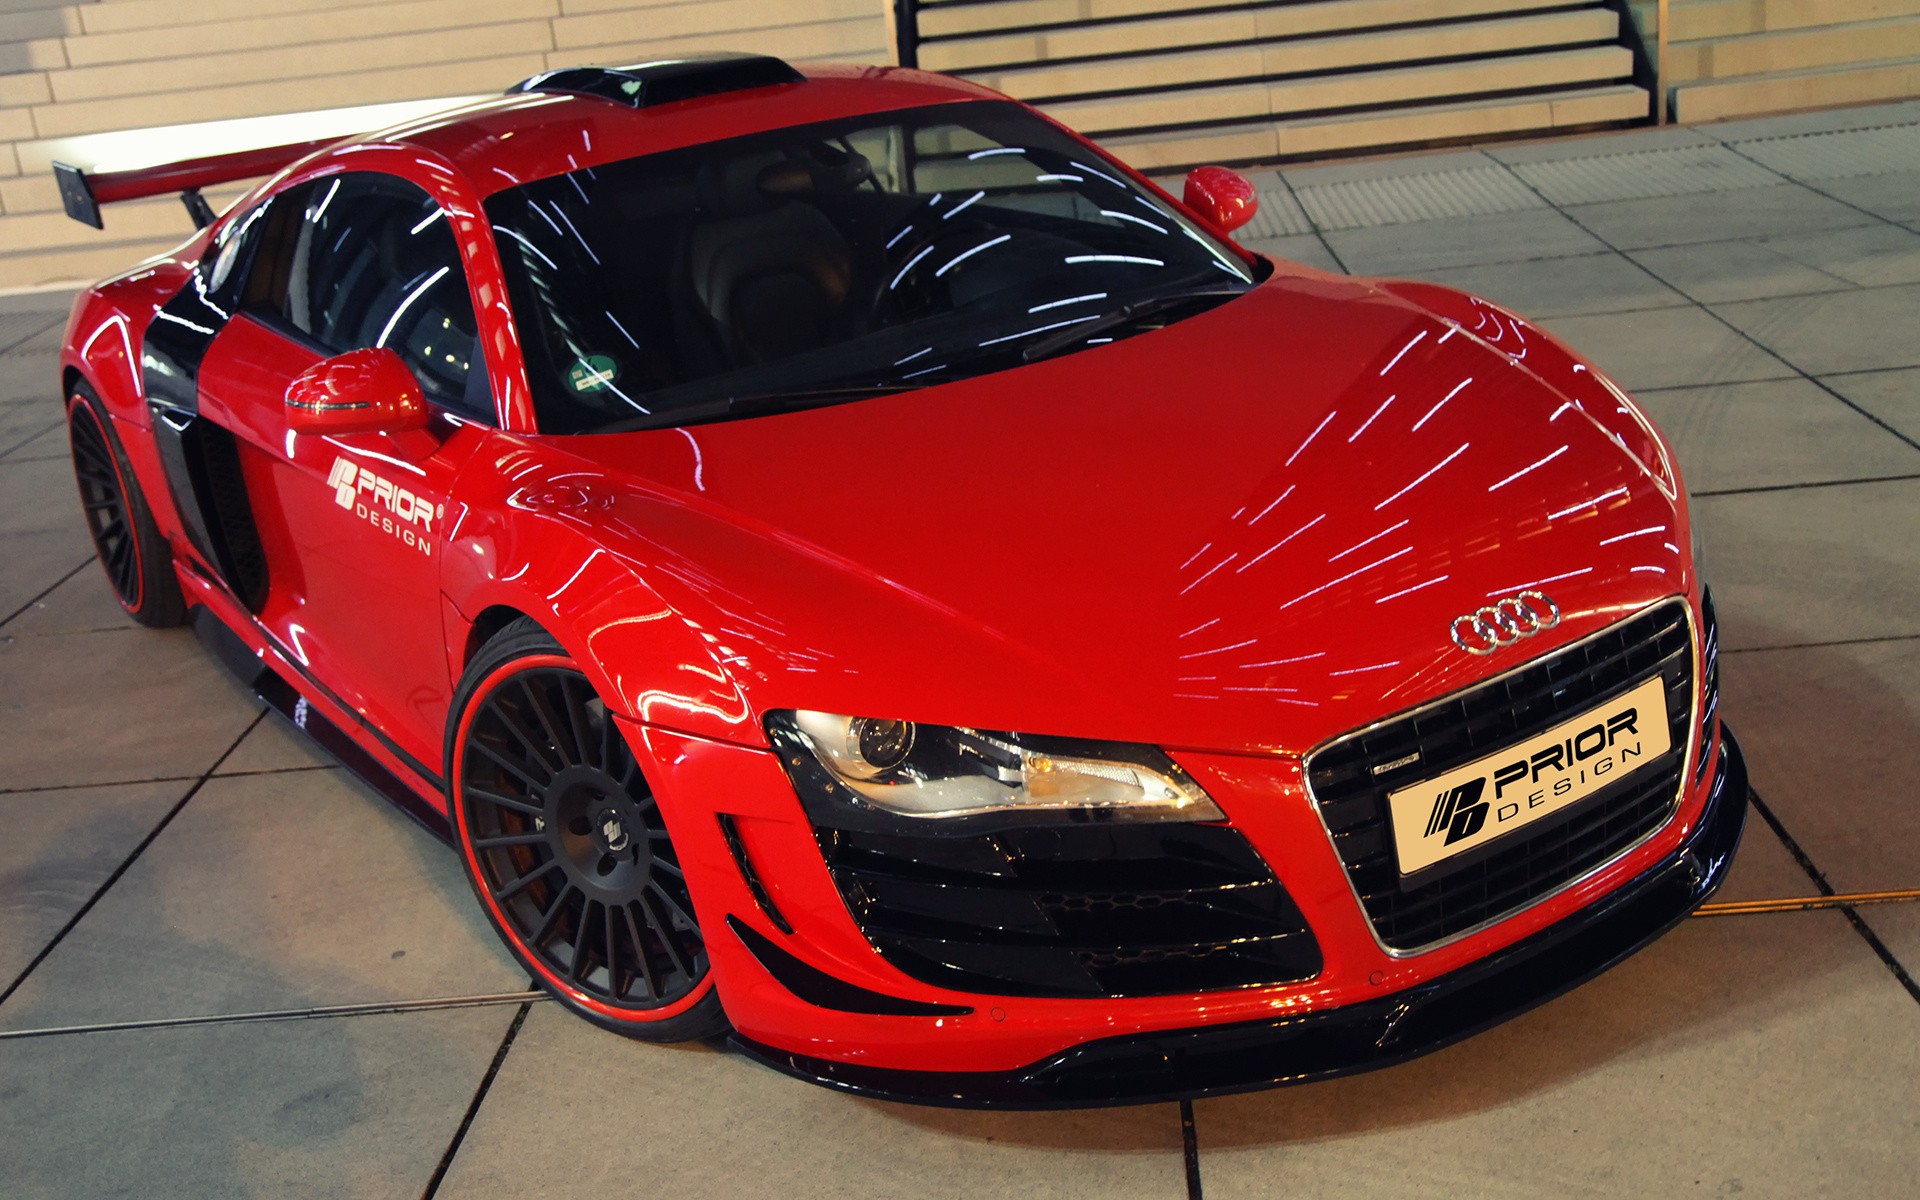 General 1920x1200 frontal view car Audi R8 red cars Audi German cars Volkswagen Group supercars